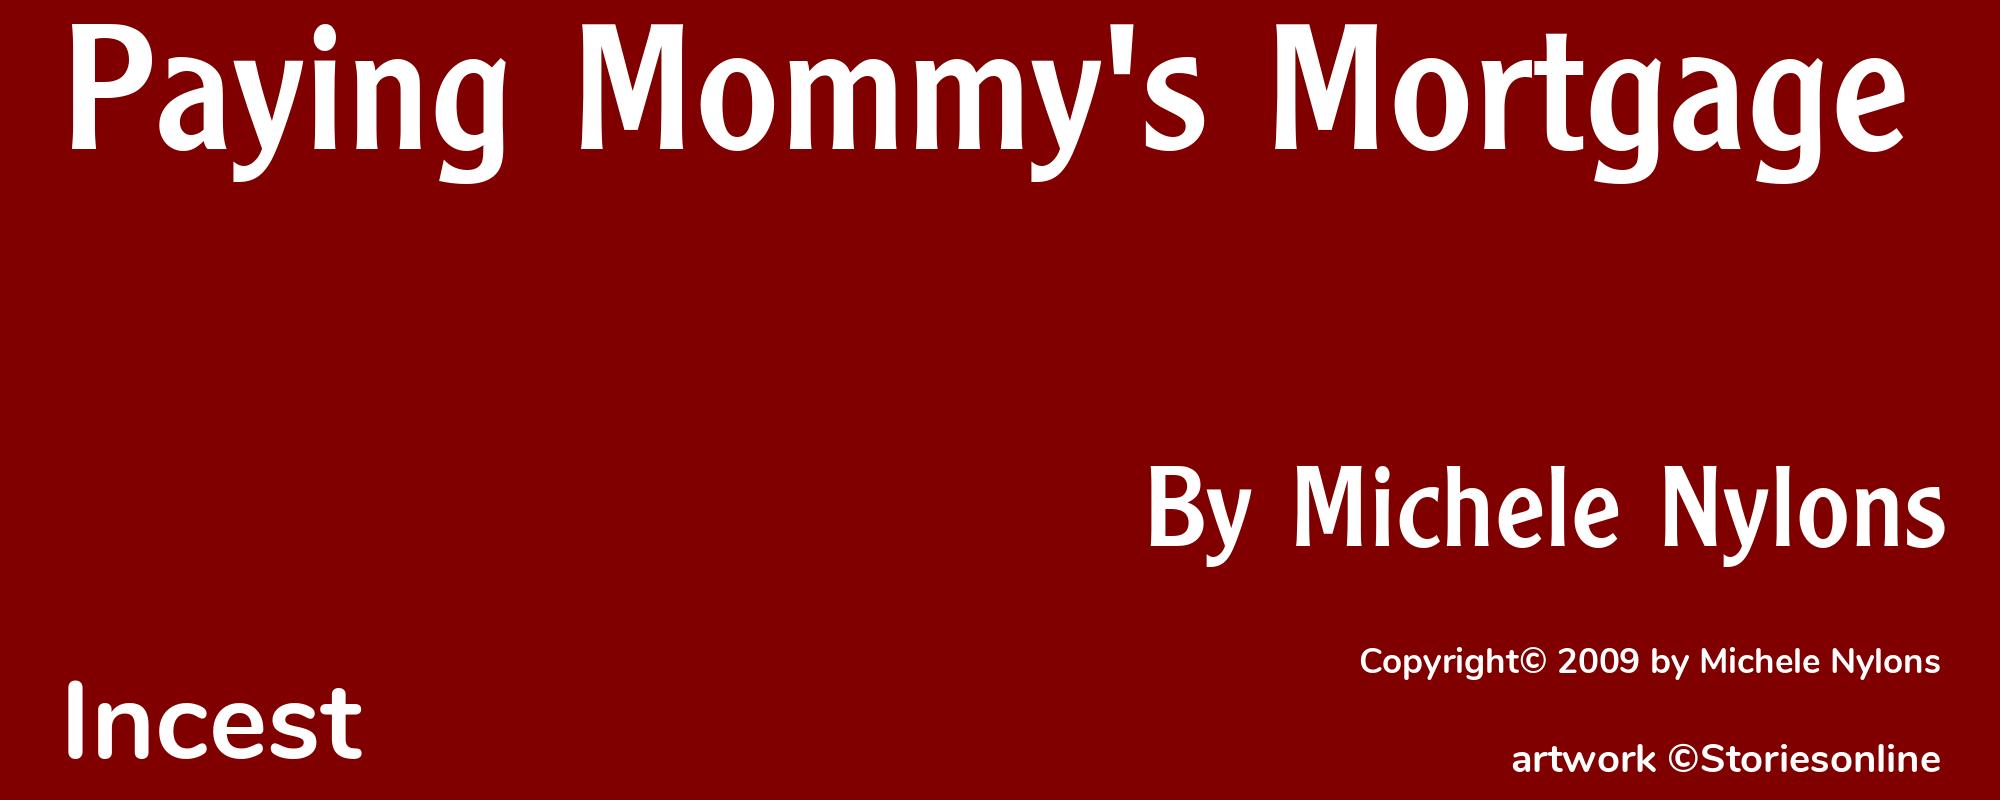 Paying Mommy's Mortgage - Cover